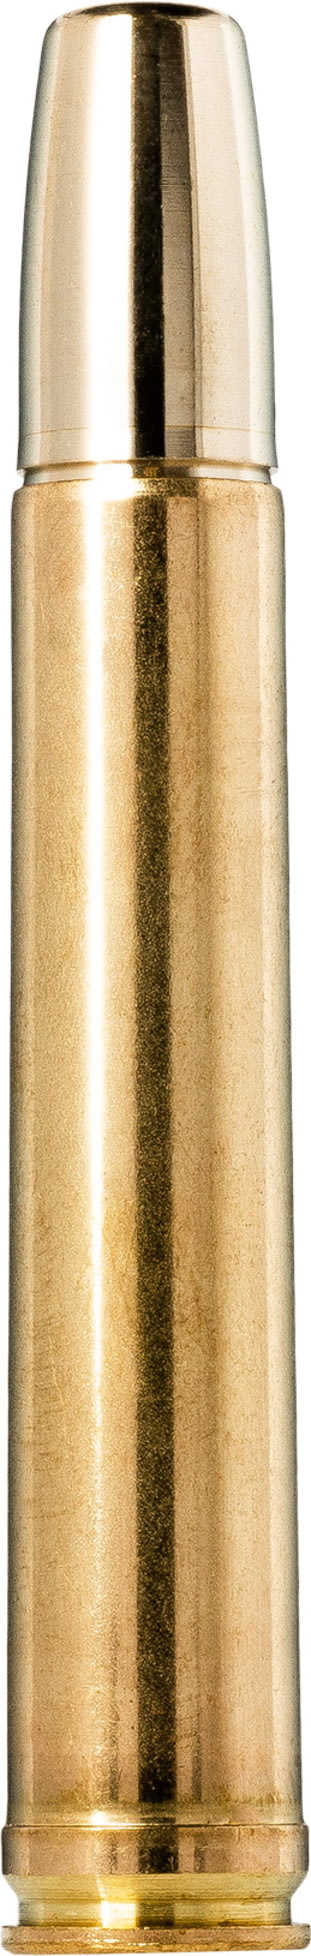 Norma Solid Ammunition .458 Winchester Magnum 500 Grain Solid Brass ...